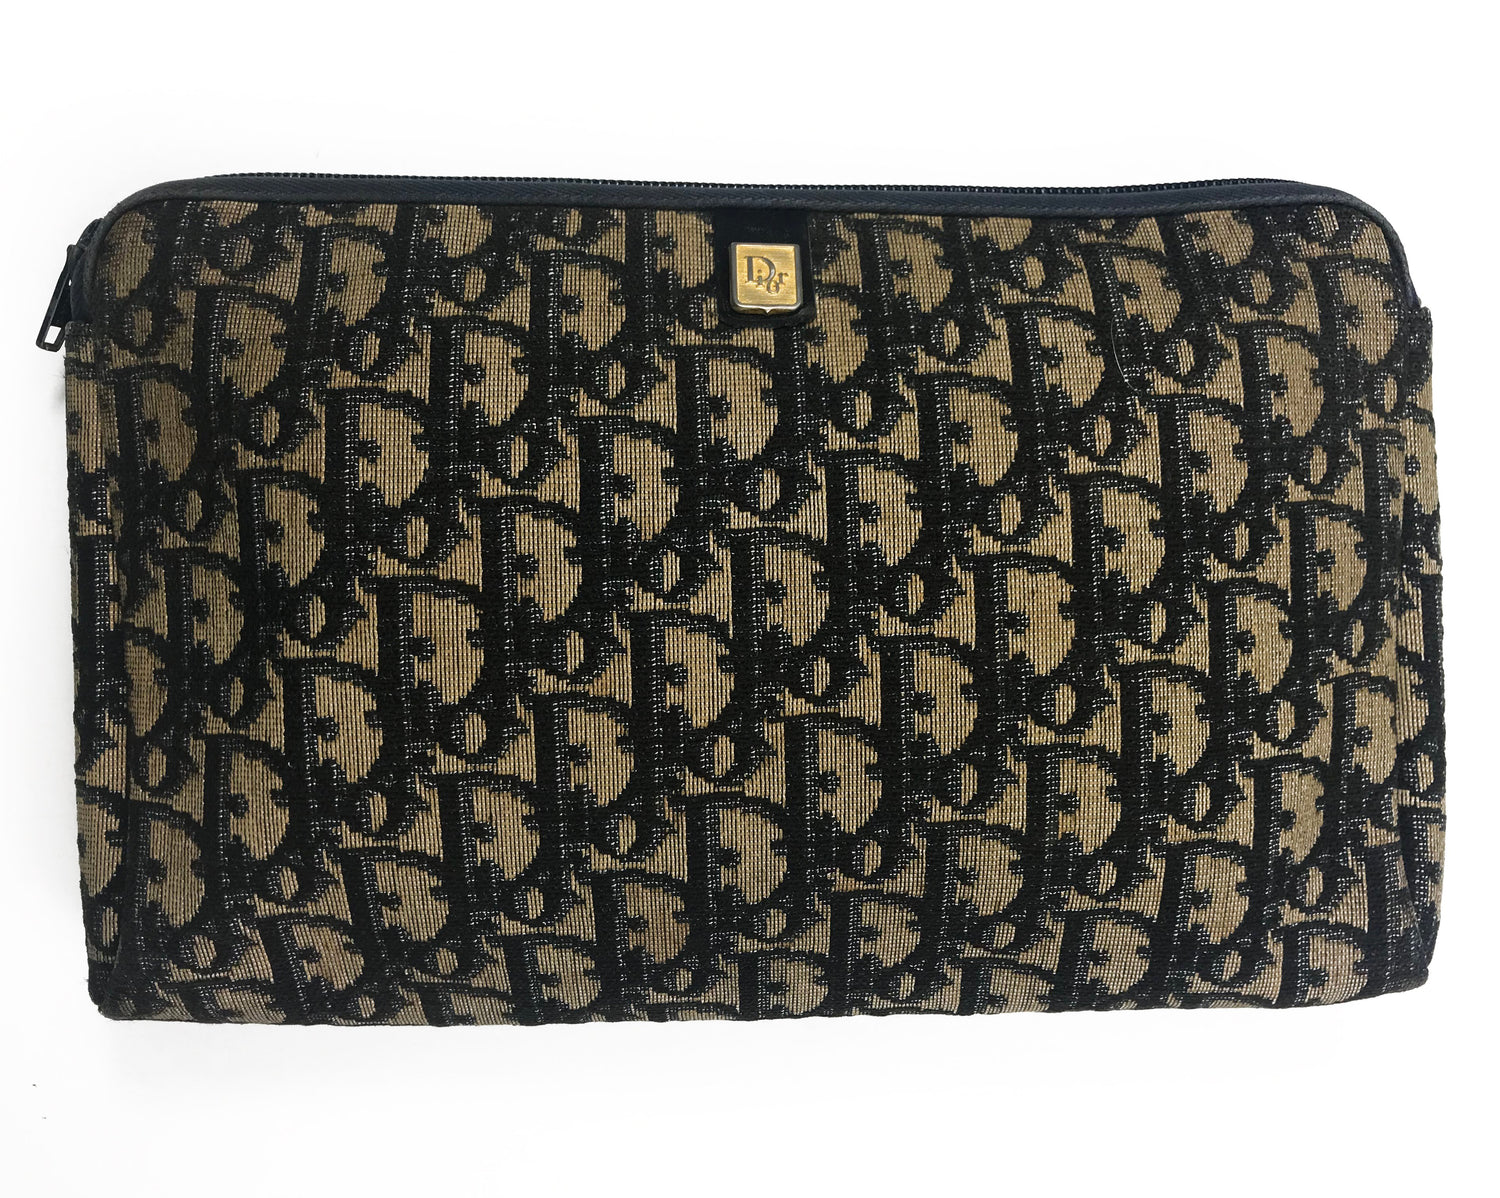 FRUIT Vintage Christian Dior 1980s navy trotter monogram clutch bag. Features a pochette style curved shape with top zipper and leather lining.